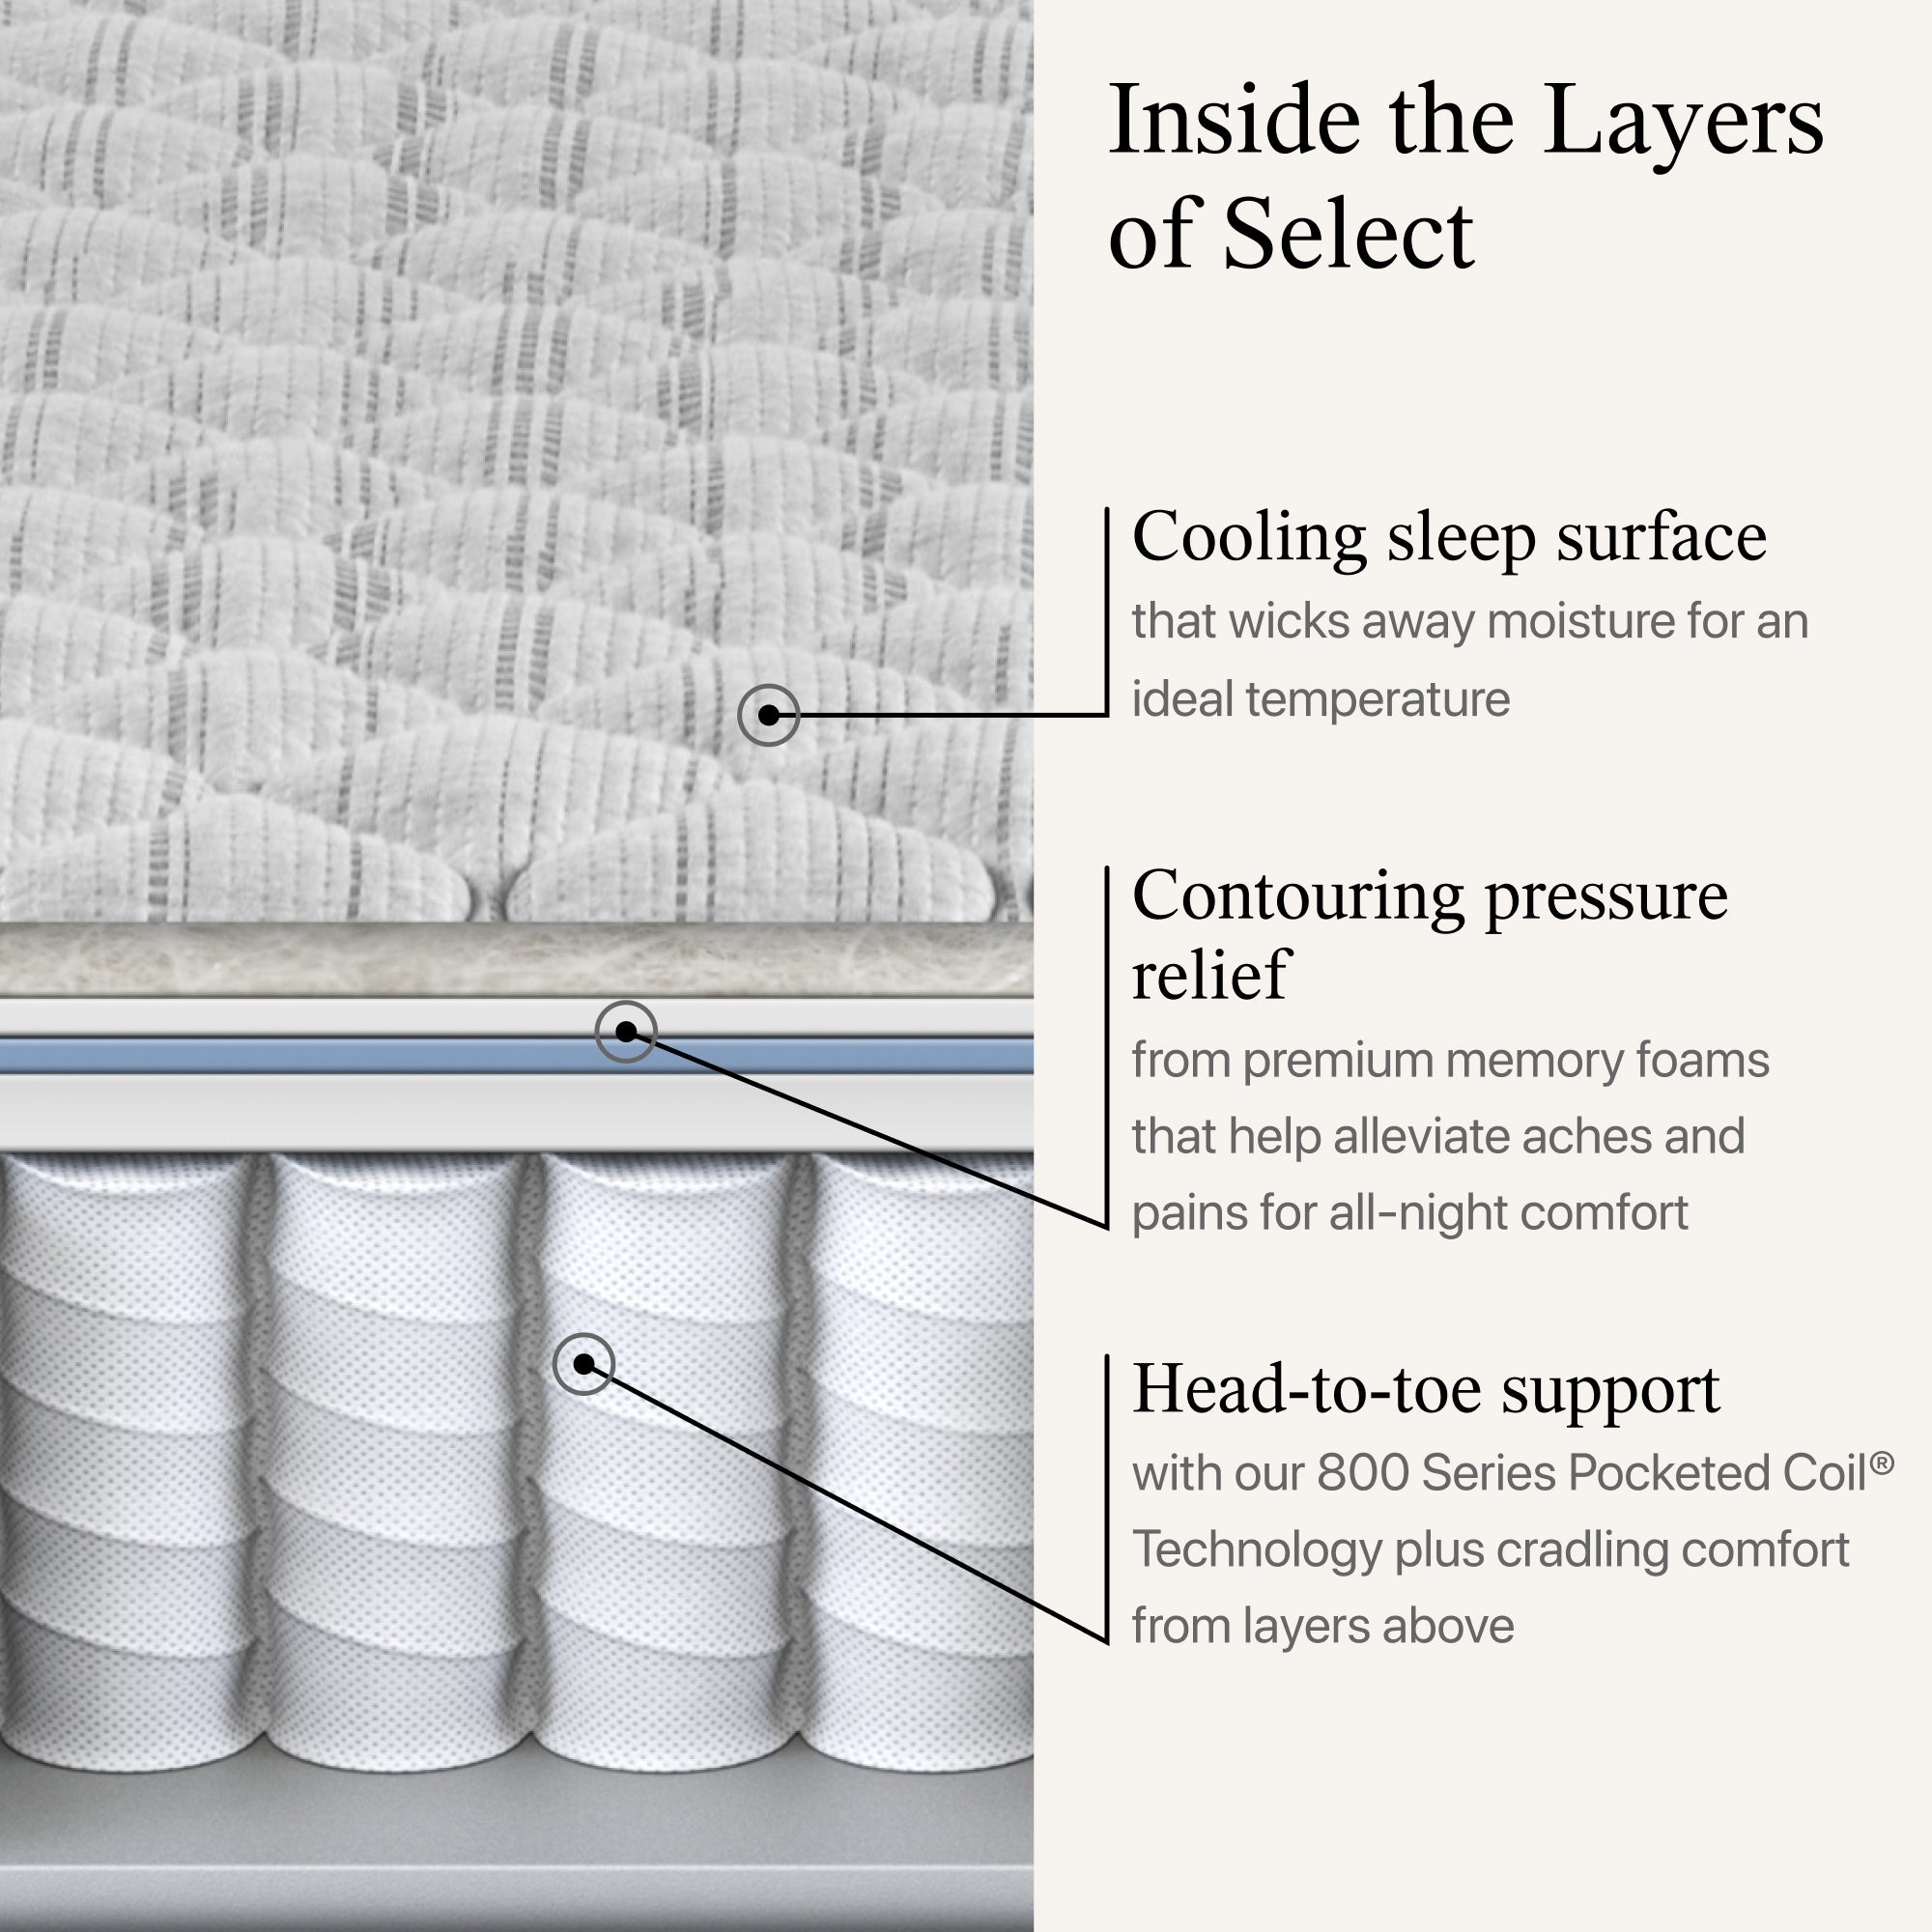 Diagram showing the materials used on the Beautyrest Select mattress ||feel: Firm